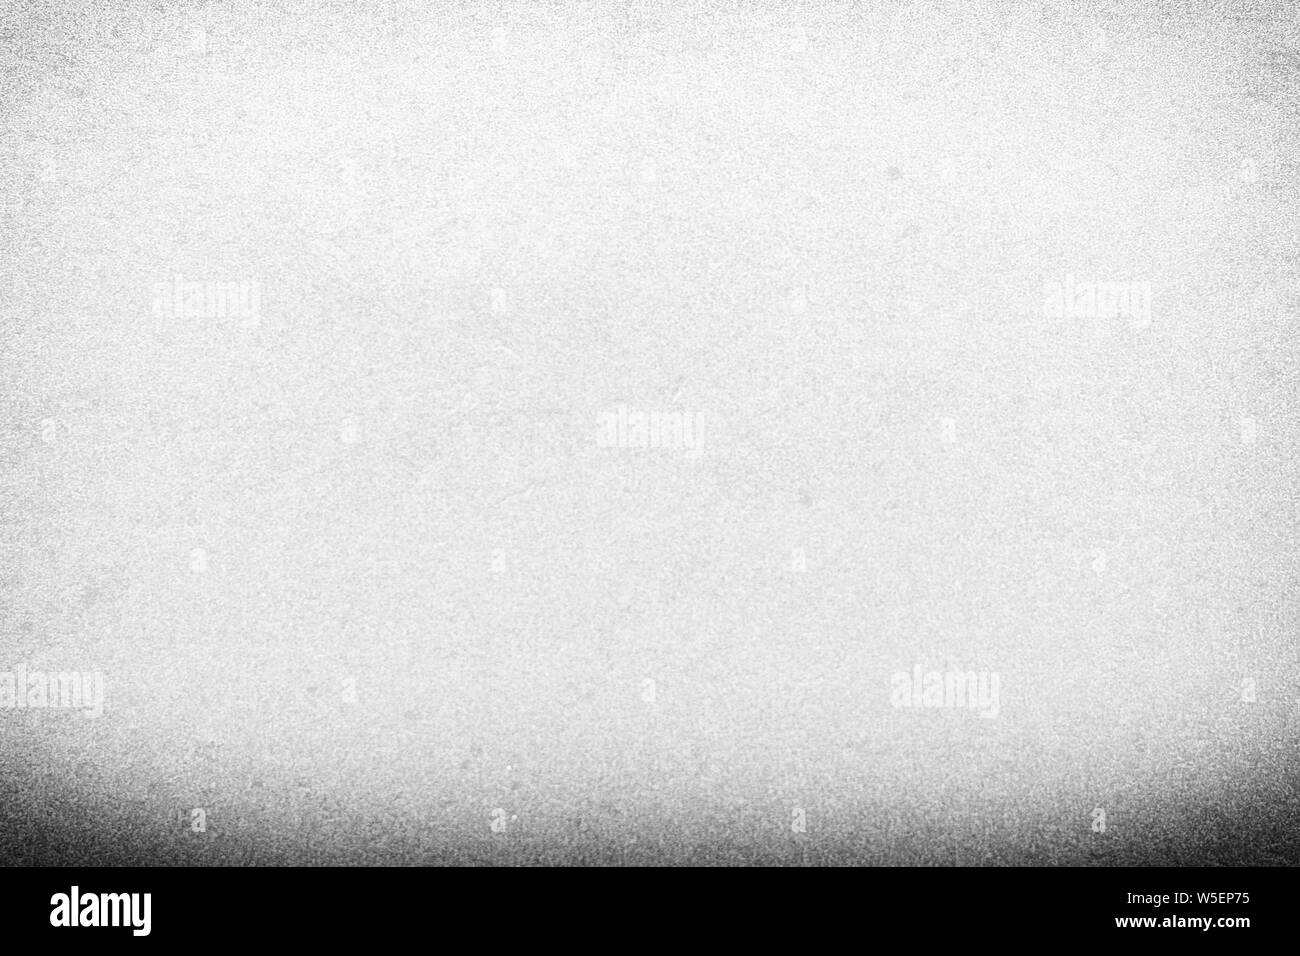 Full frame old white paper texture background with vignette for design backdrop or overlay design Stock Photo